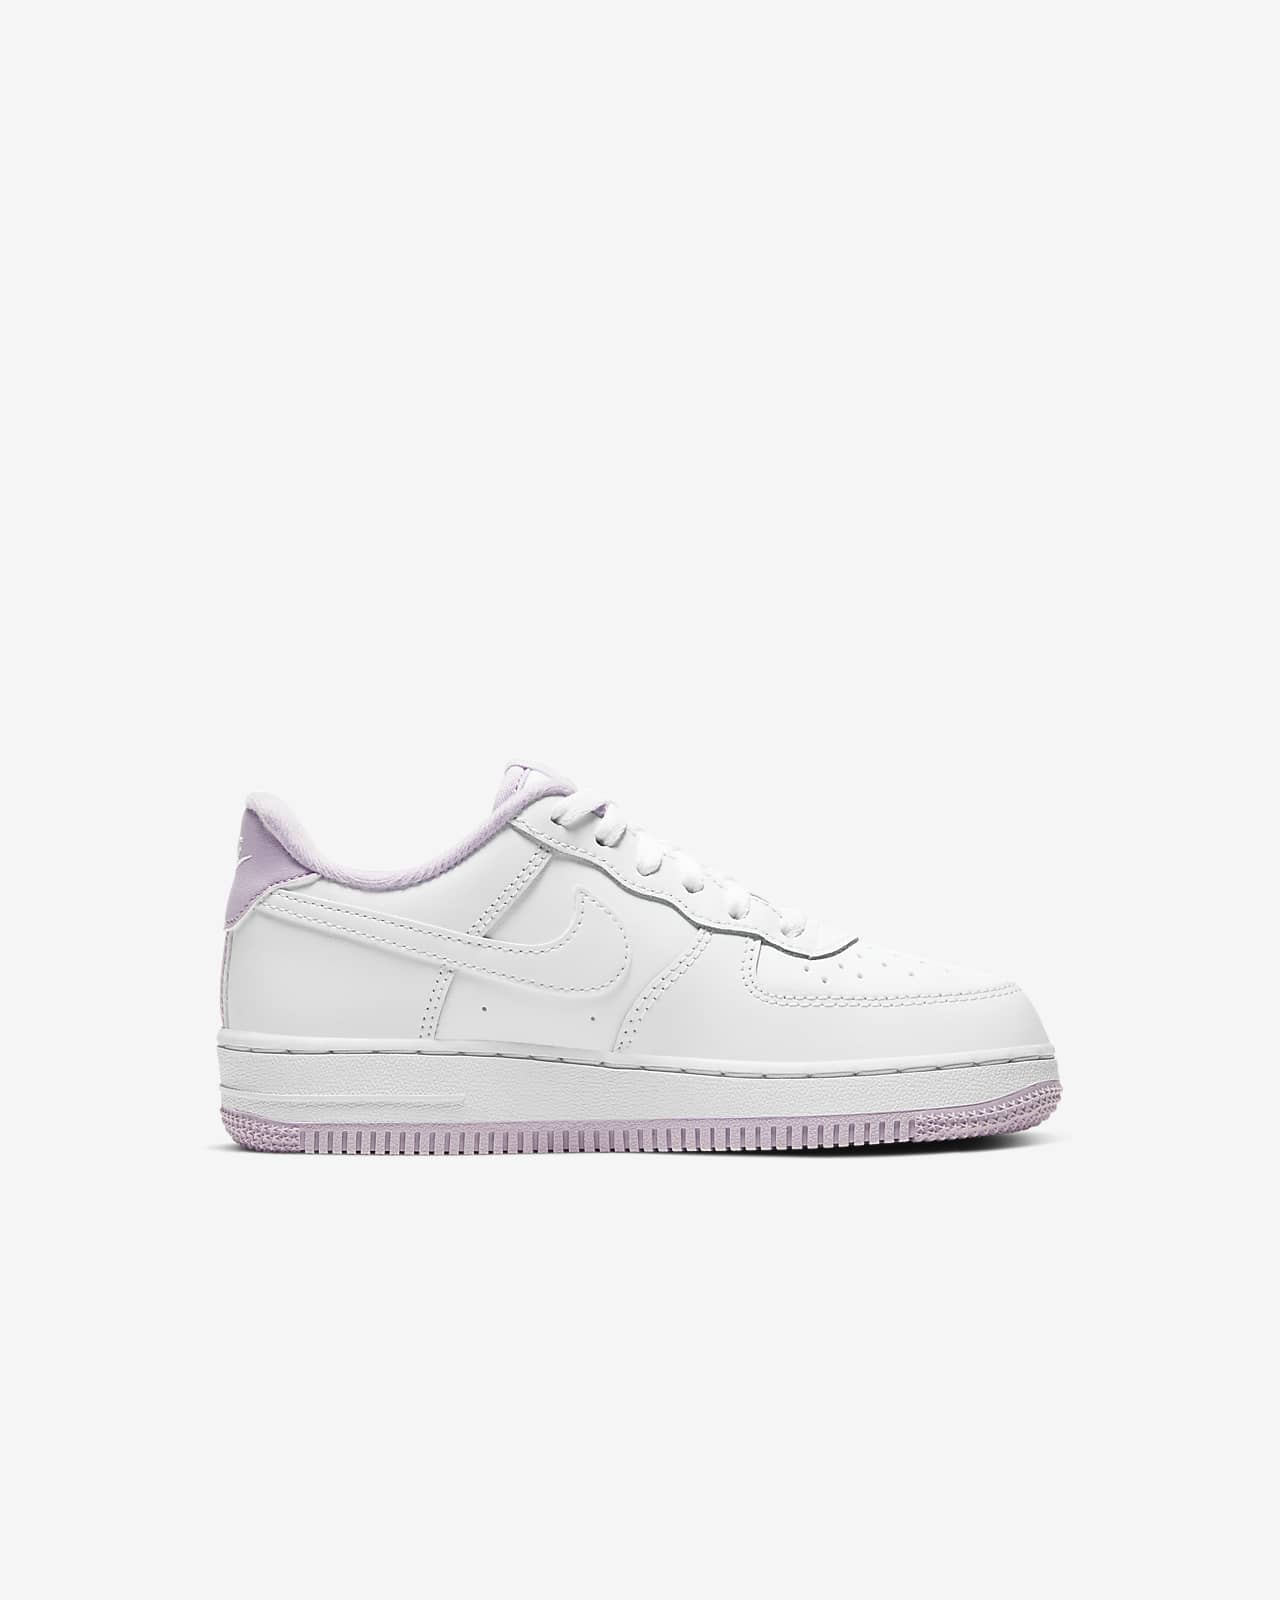 nike air force 1 iced lilac